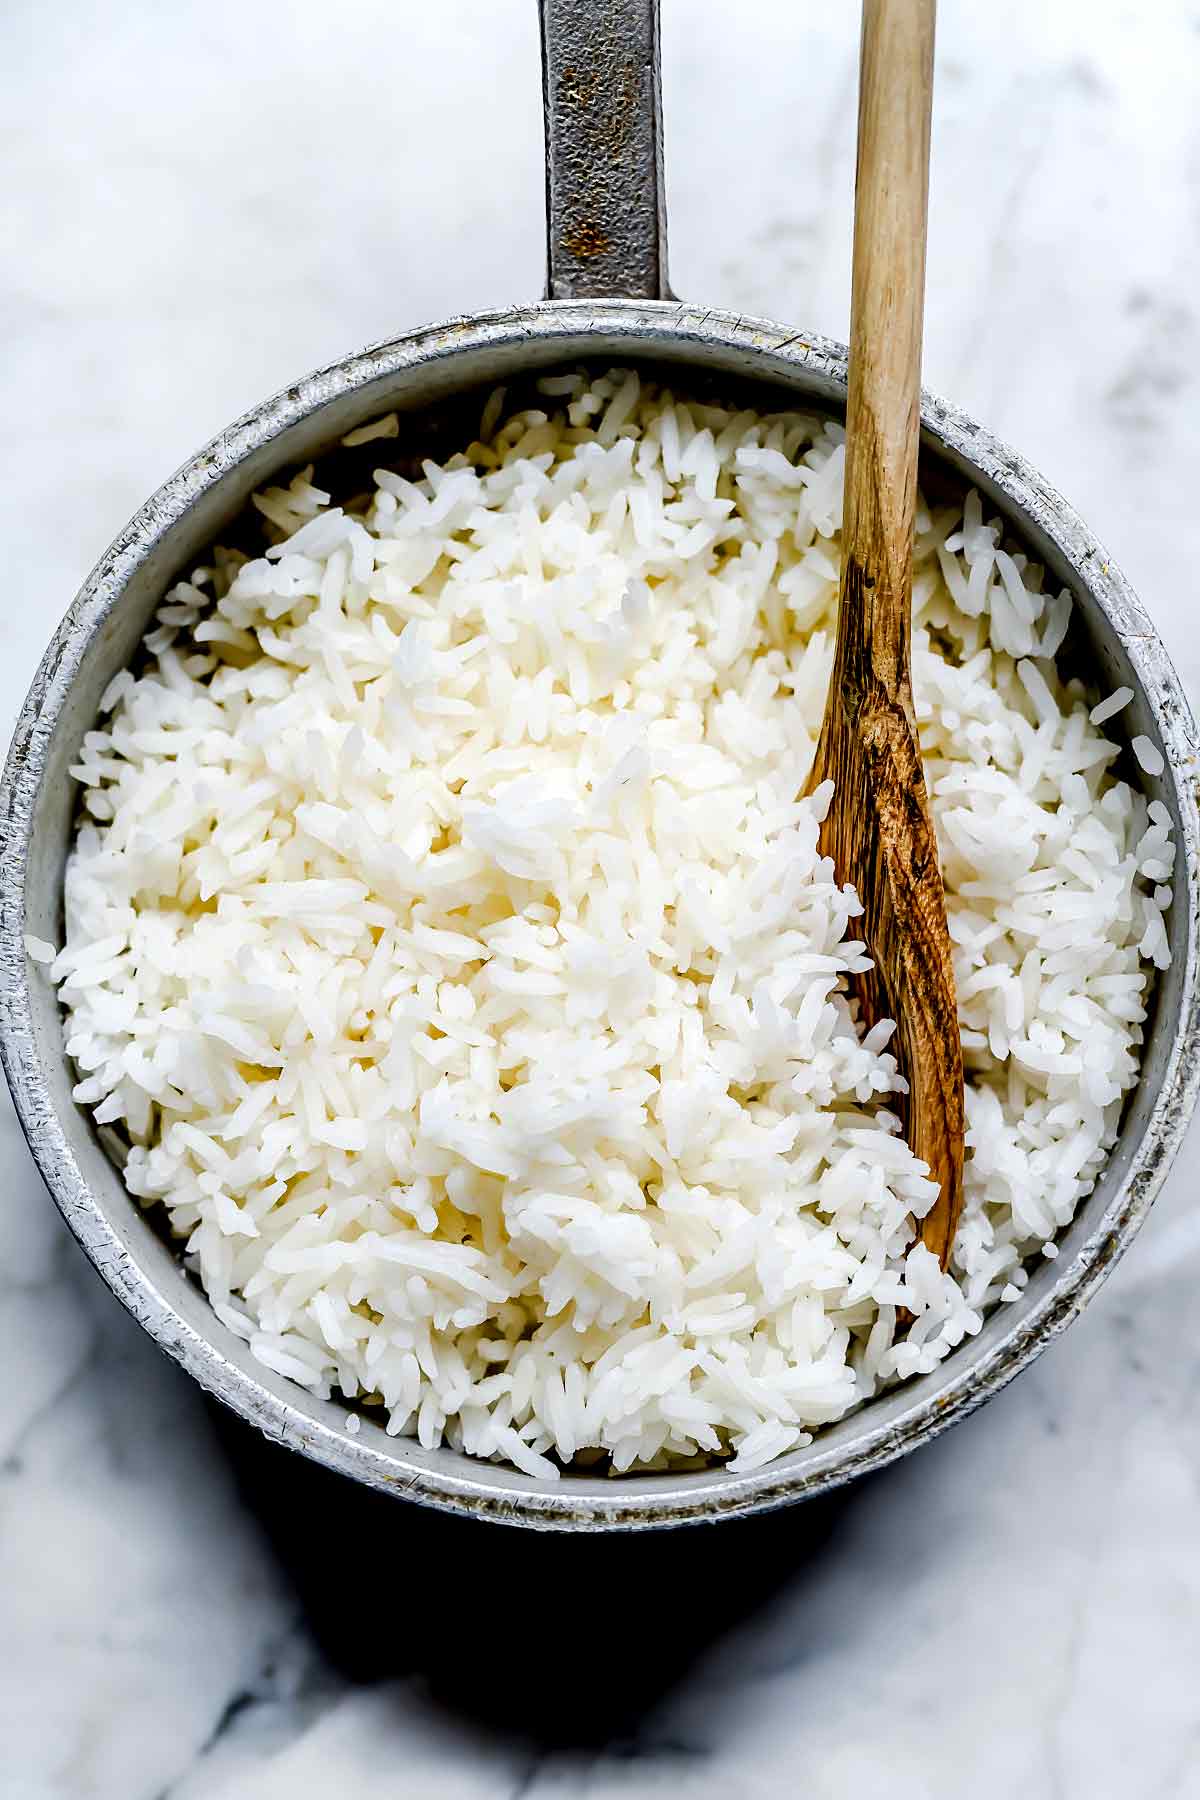 How To Cook Rice On the Stove (White, Brown or Basmati)